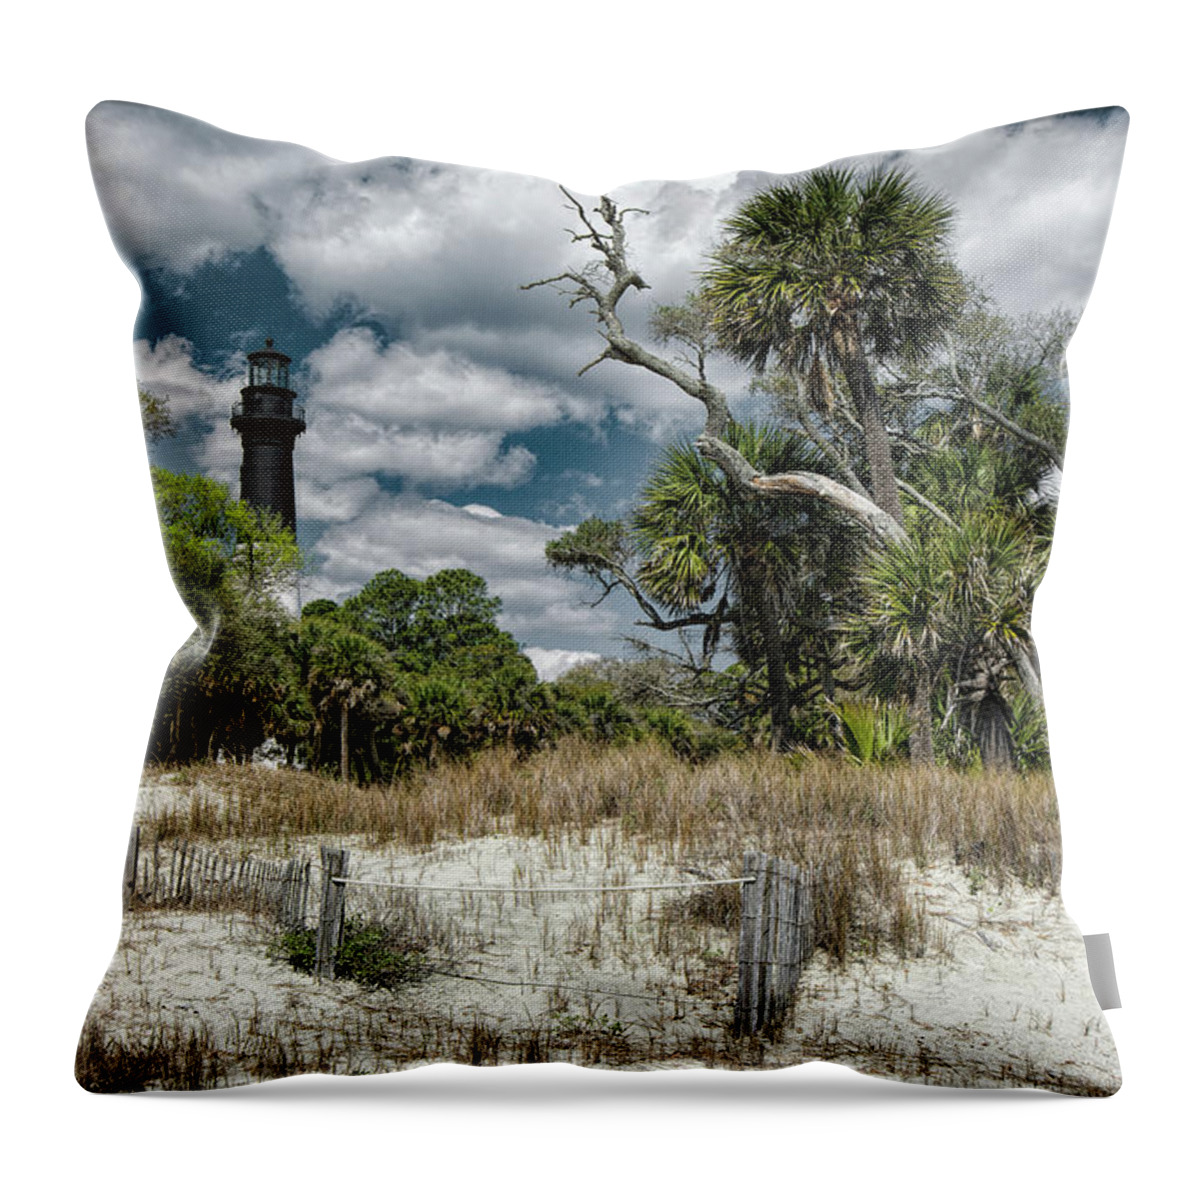 Sand Throw Pillow featuring the photograph Hunting Island Lighthouse by Erika Fawcett